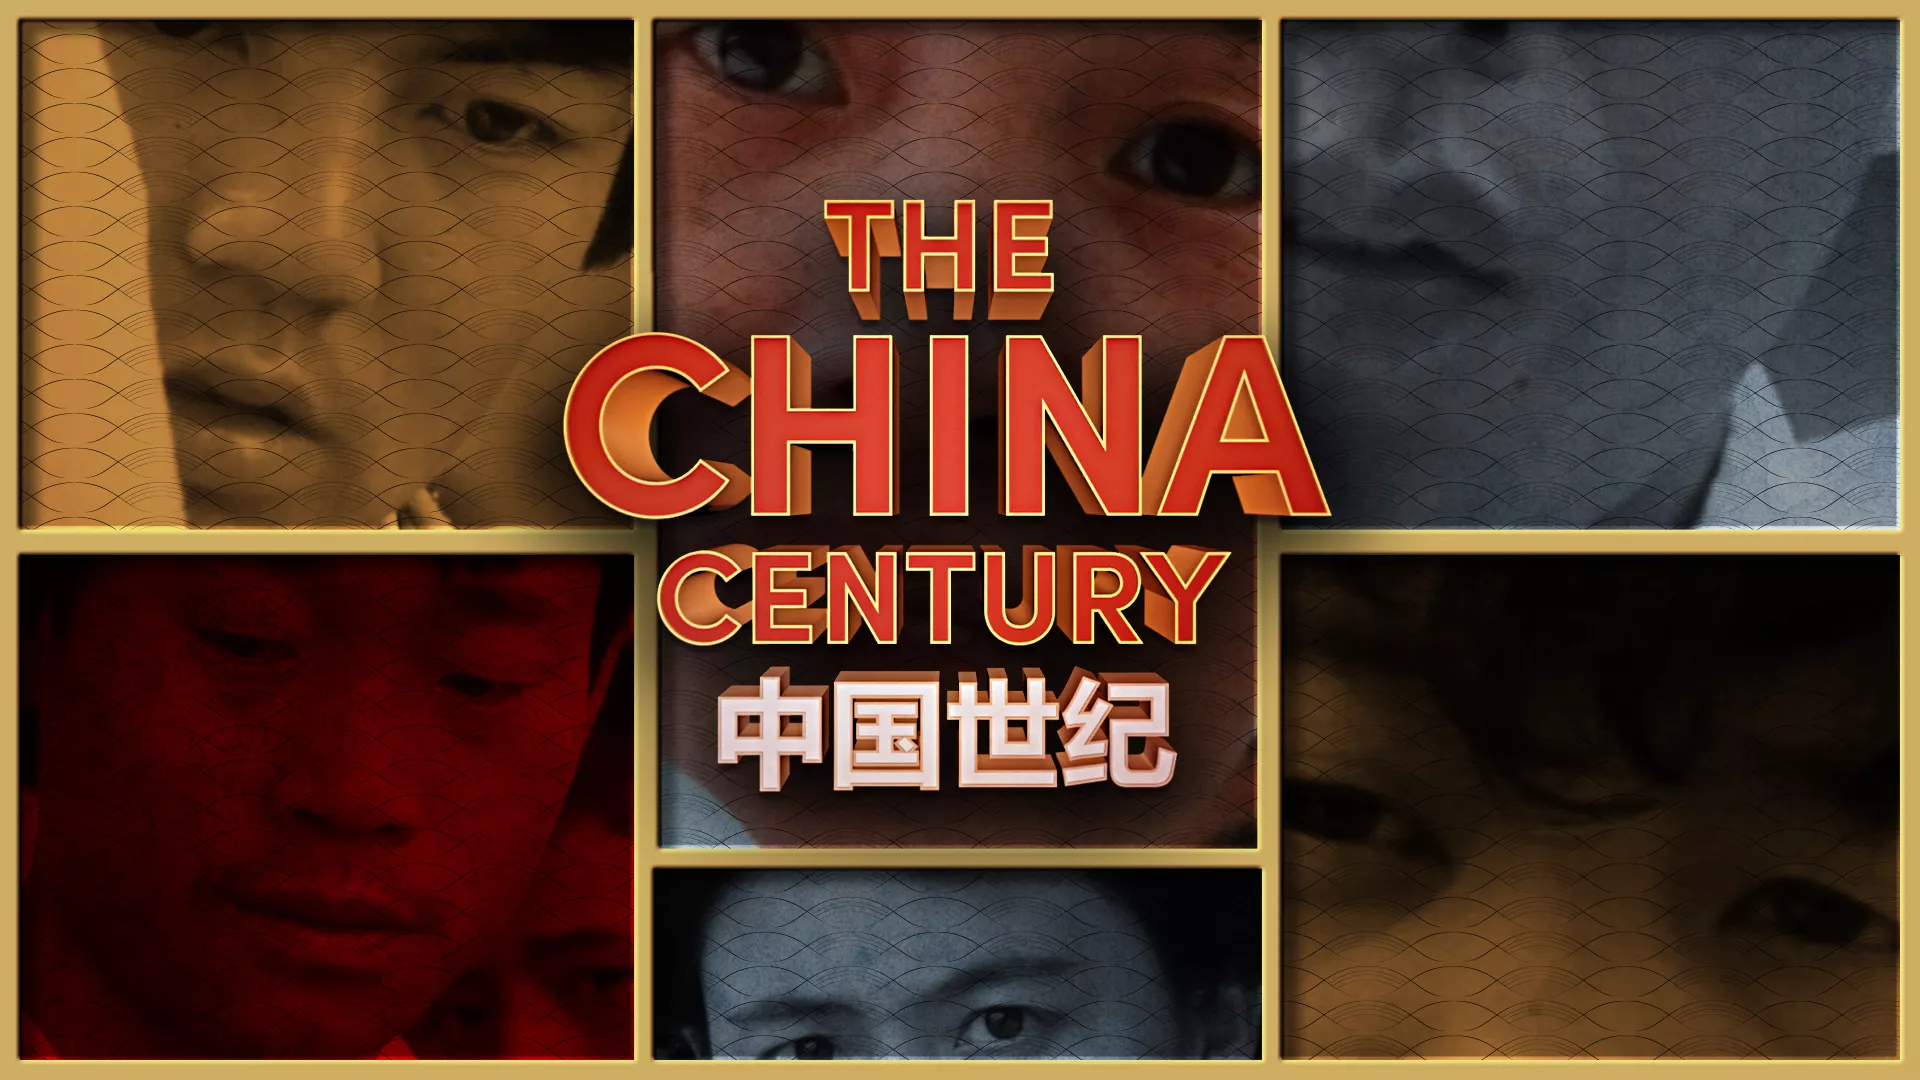 You are currently viewing The China Century episode 5